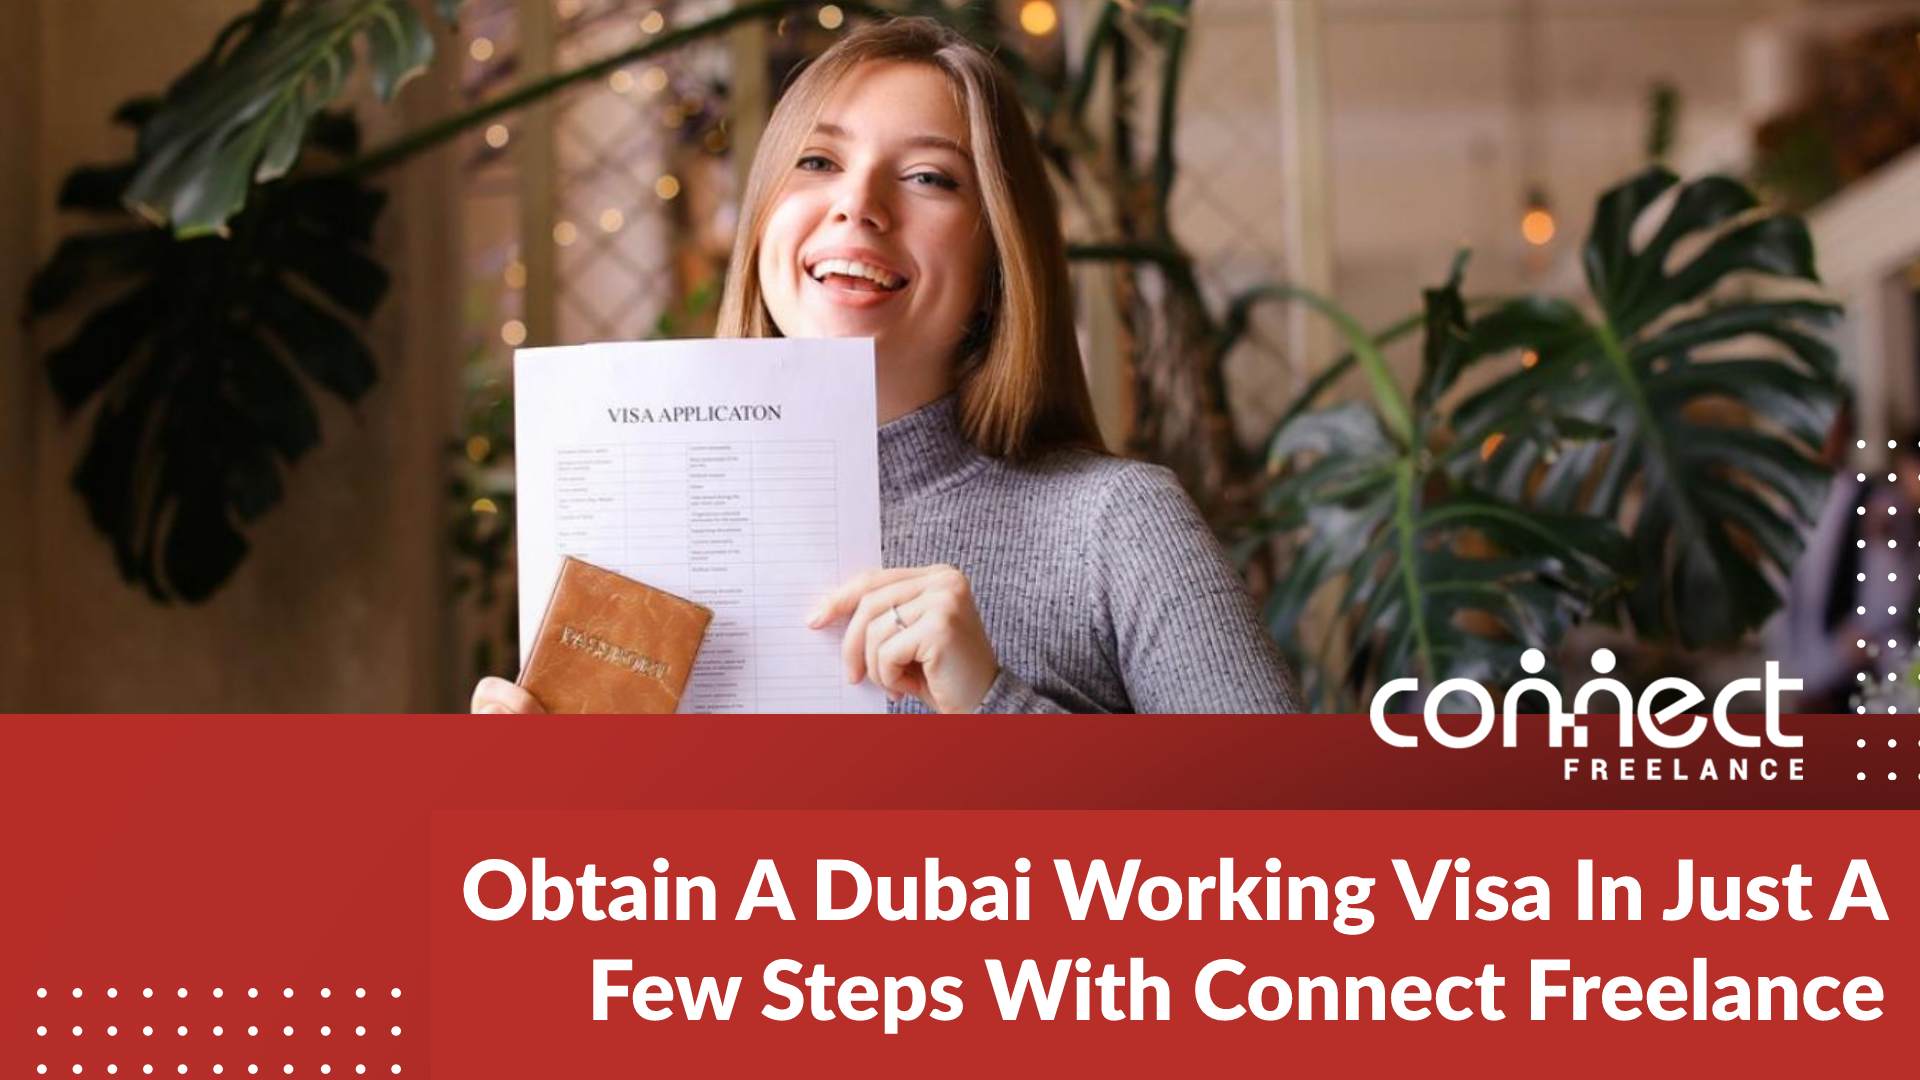 Obtain A Dubai Working Visa In Just A Few Steps With Connect Freelance